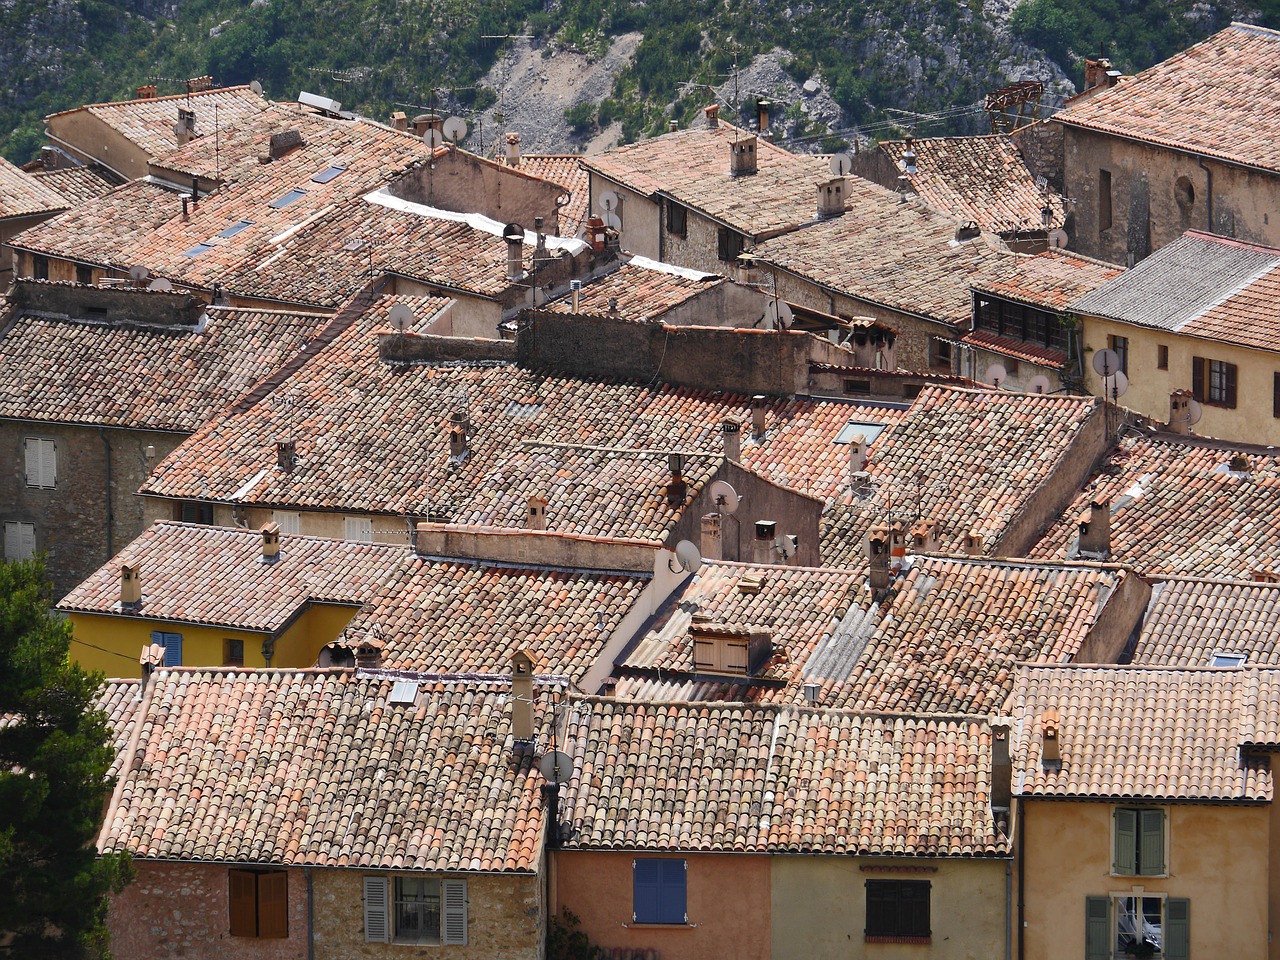 southern roofs clay pans maritime alps free photo